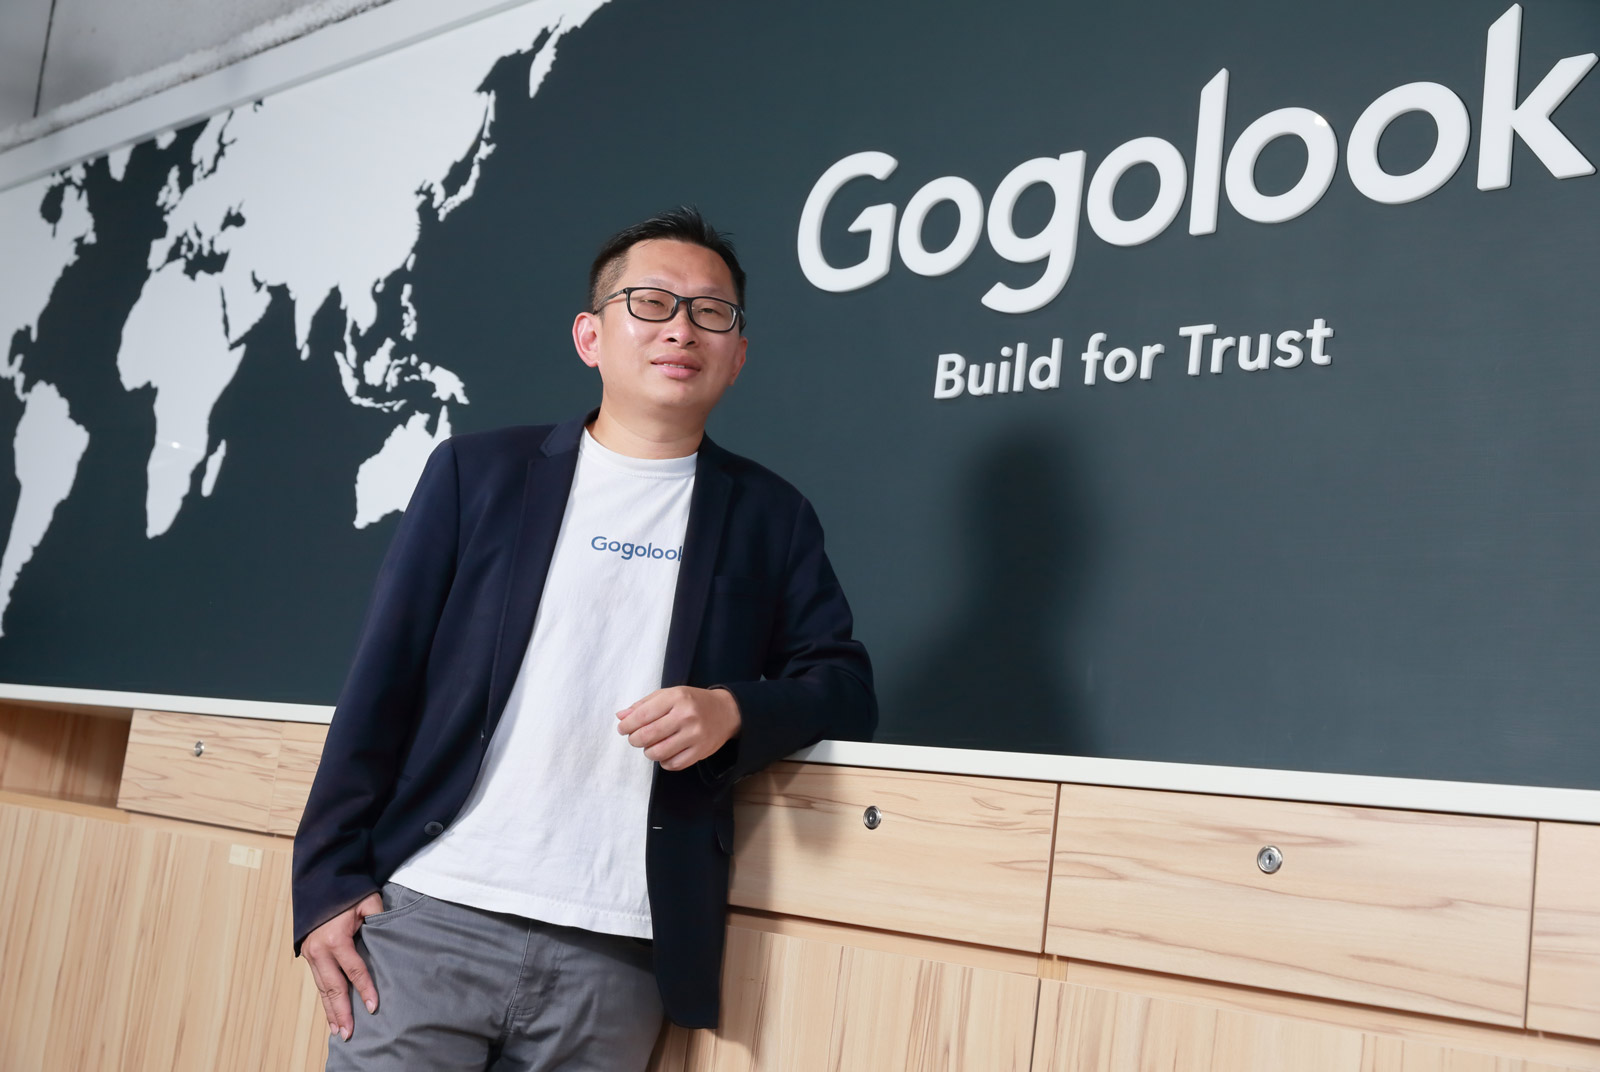 How Taiwan’s Gogolook uses AI to build a TrustTech startup